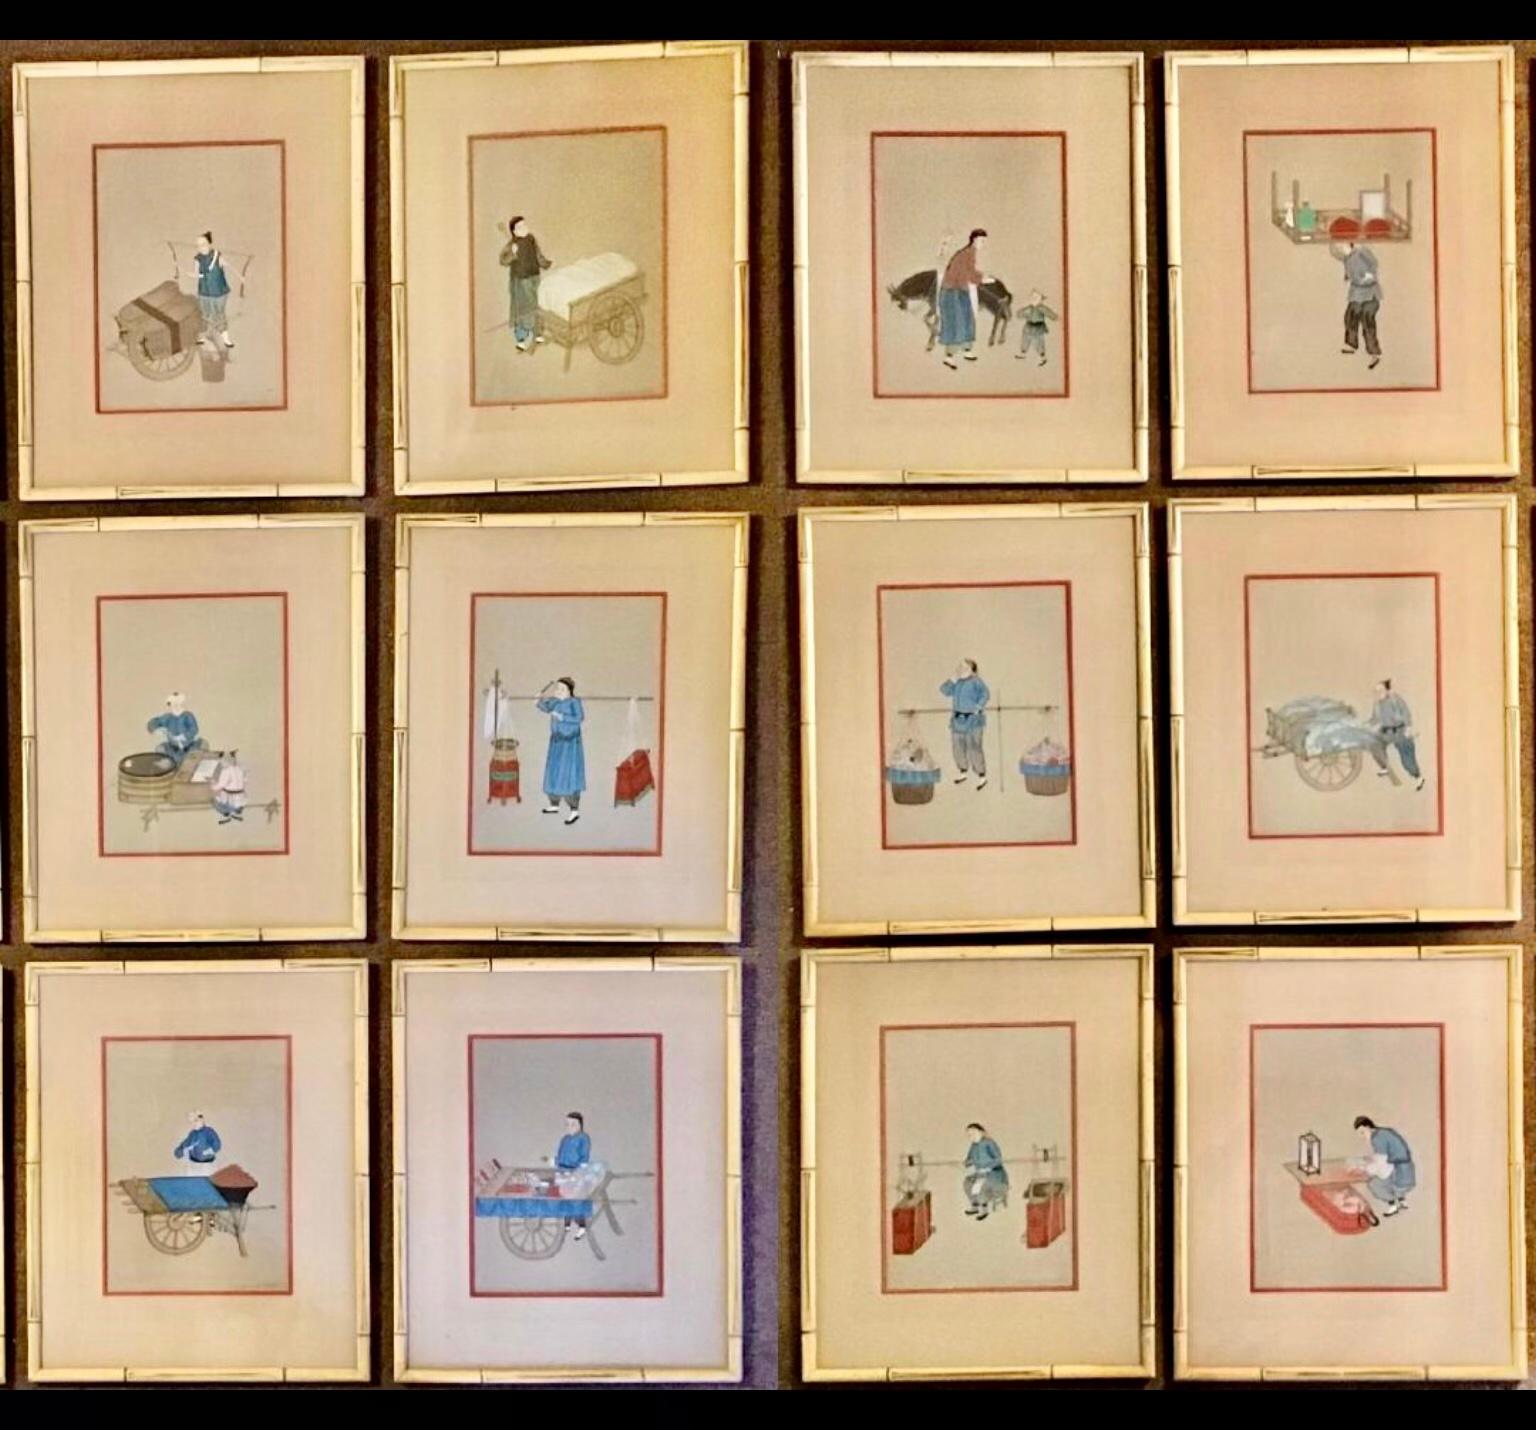 Set of twelve early 20th century Chinese Gouache paintings depicting everyday life of various craftsmen. Examples are a barber, food vendors, medicine man, etc. All are framed under glass in bamboo frames. Titled in pencil on the front of each and a